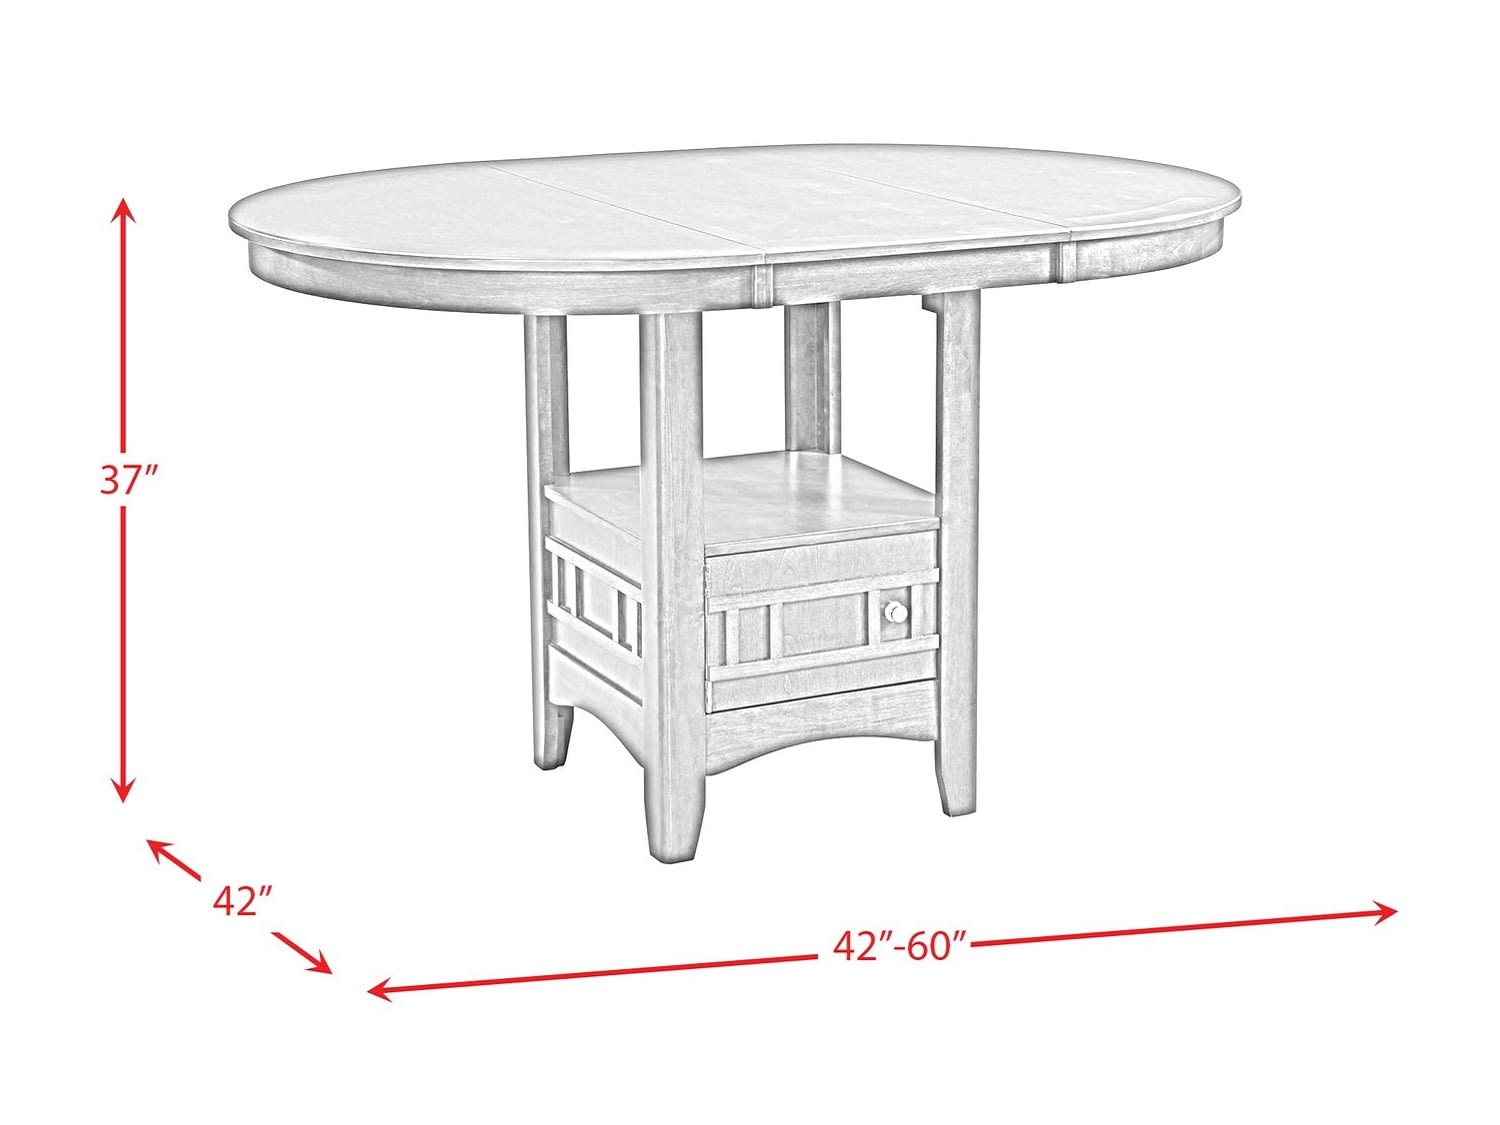 MARINA Counter Height Dining Table - Dimensions